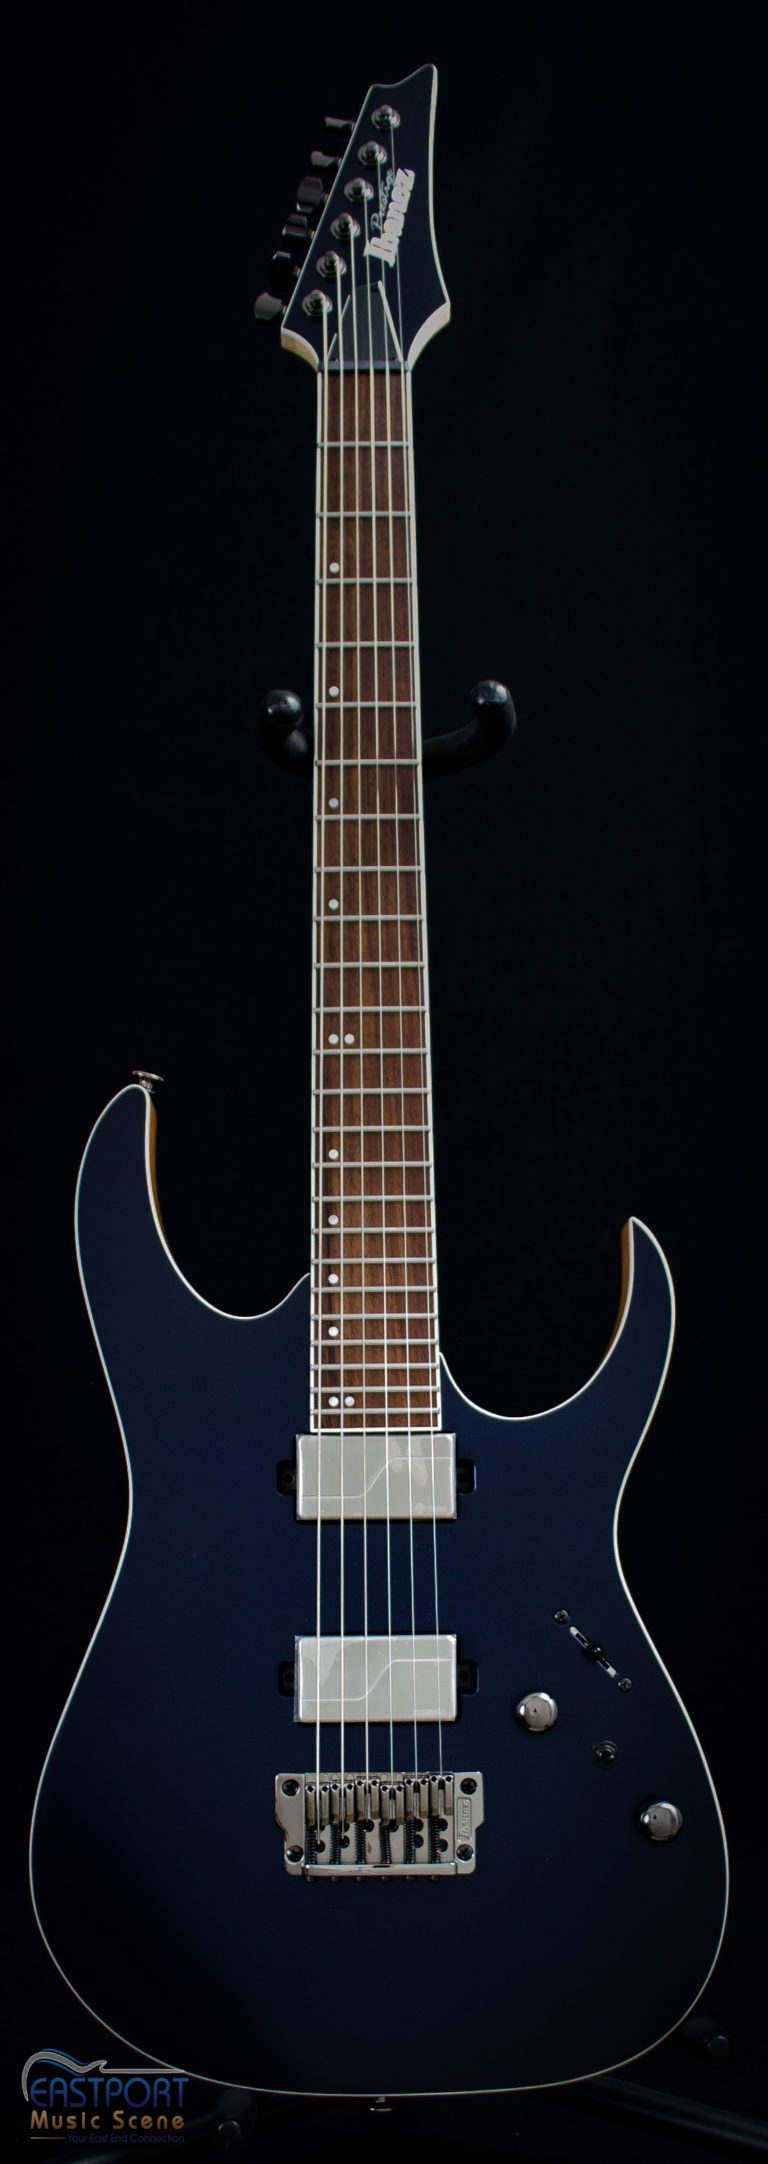 A blue electric guitar with six strings and a white neck.